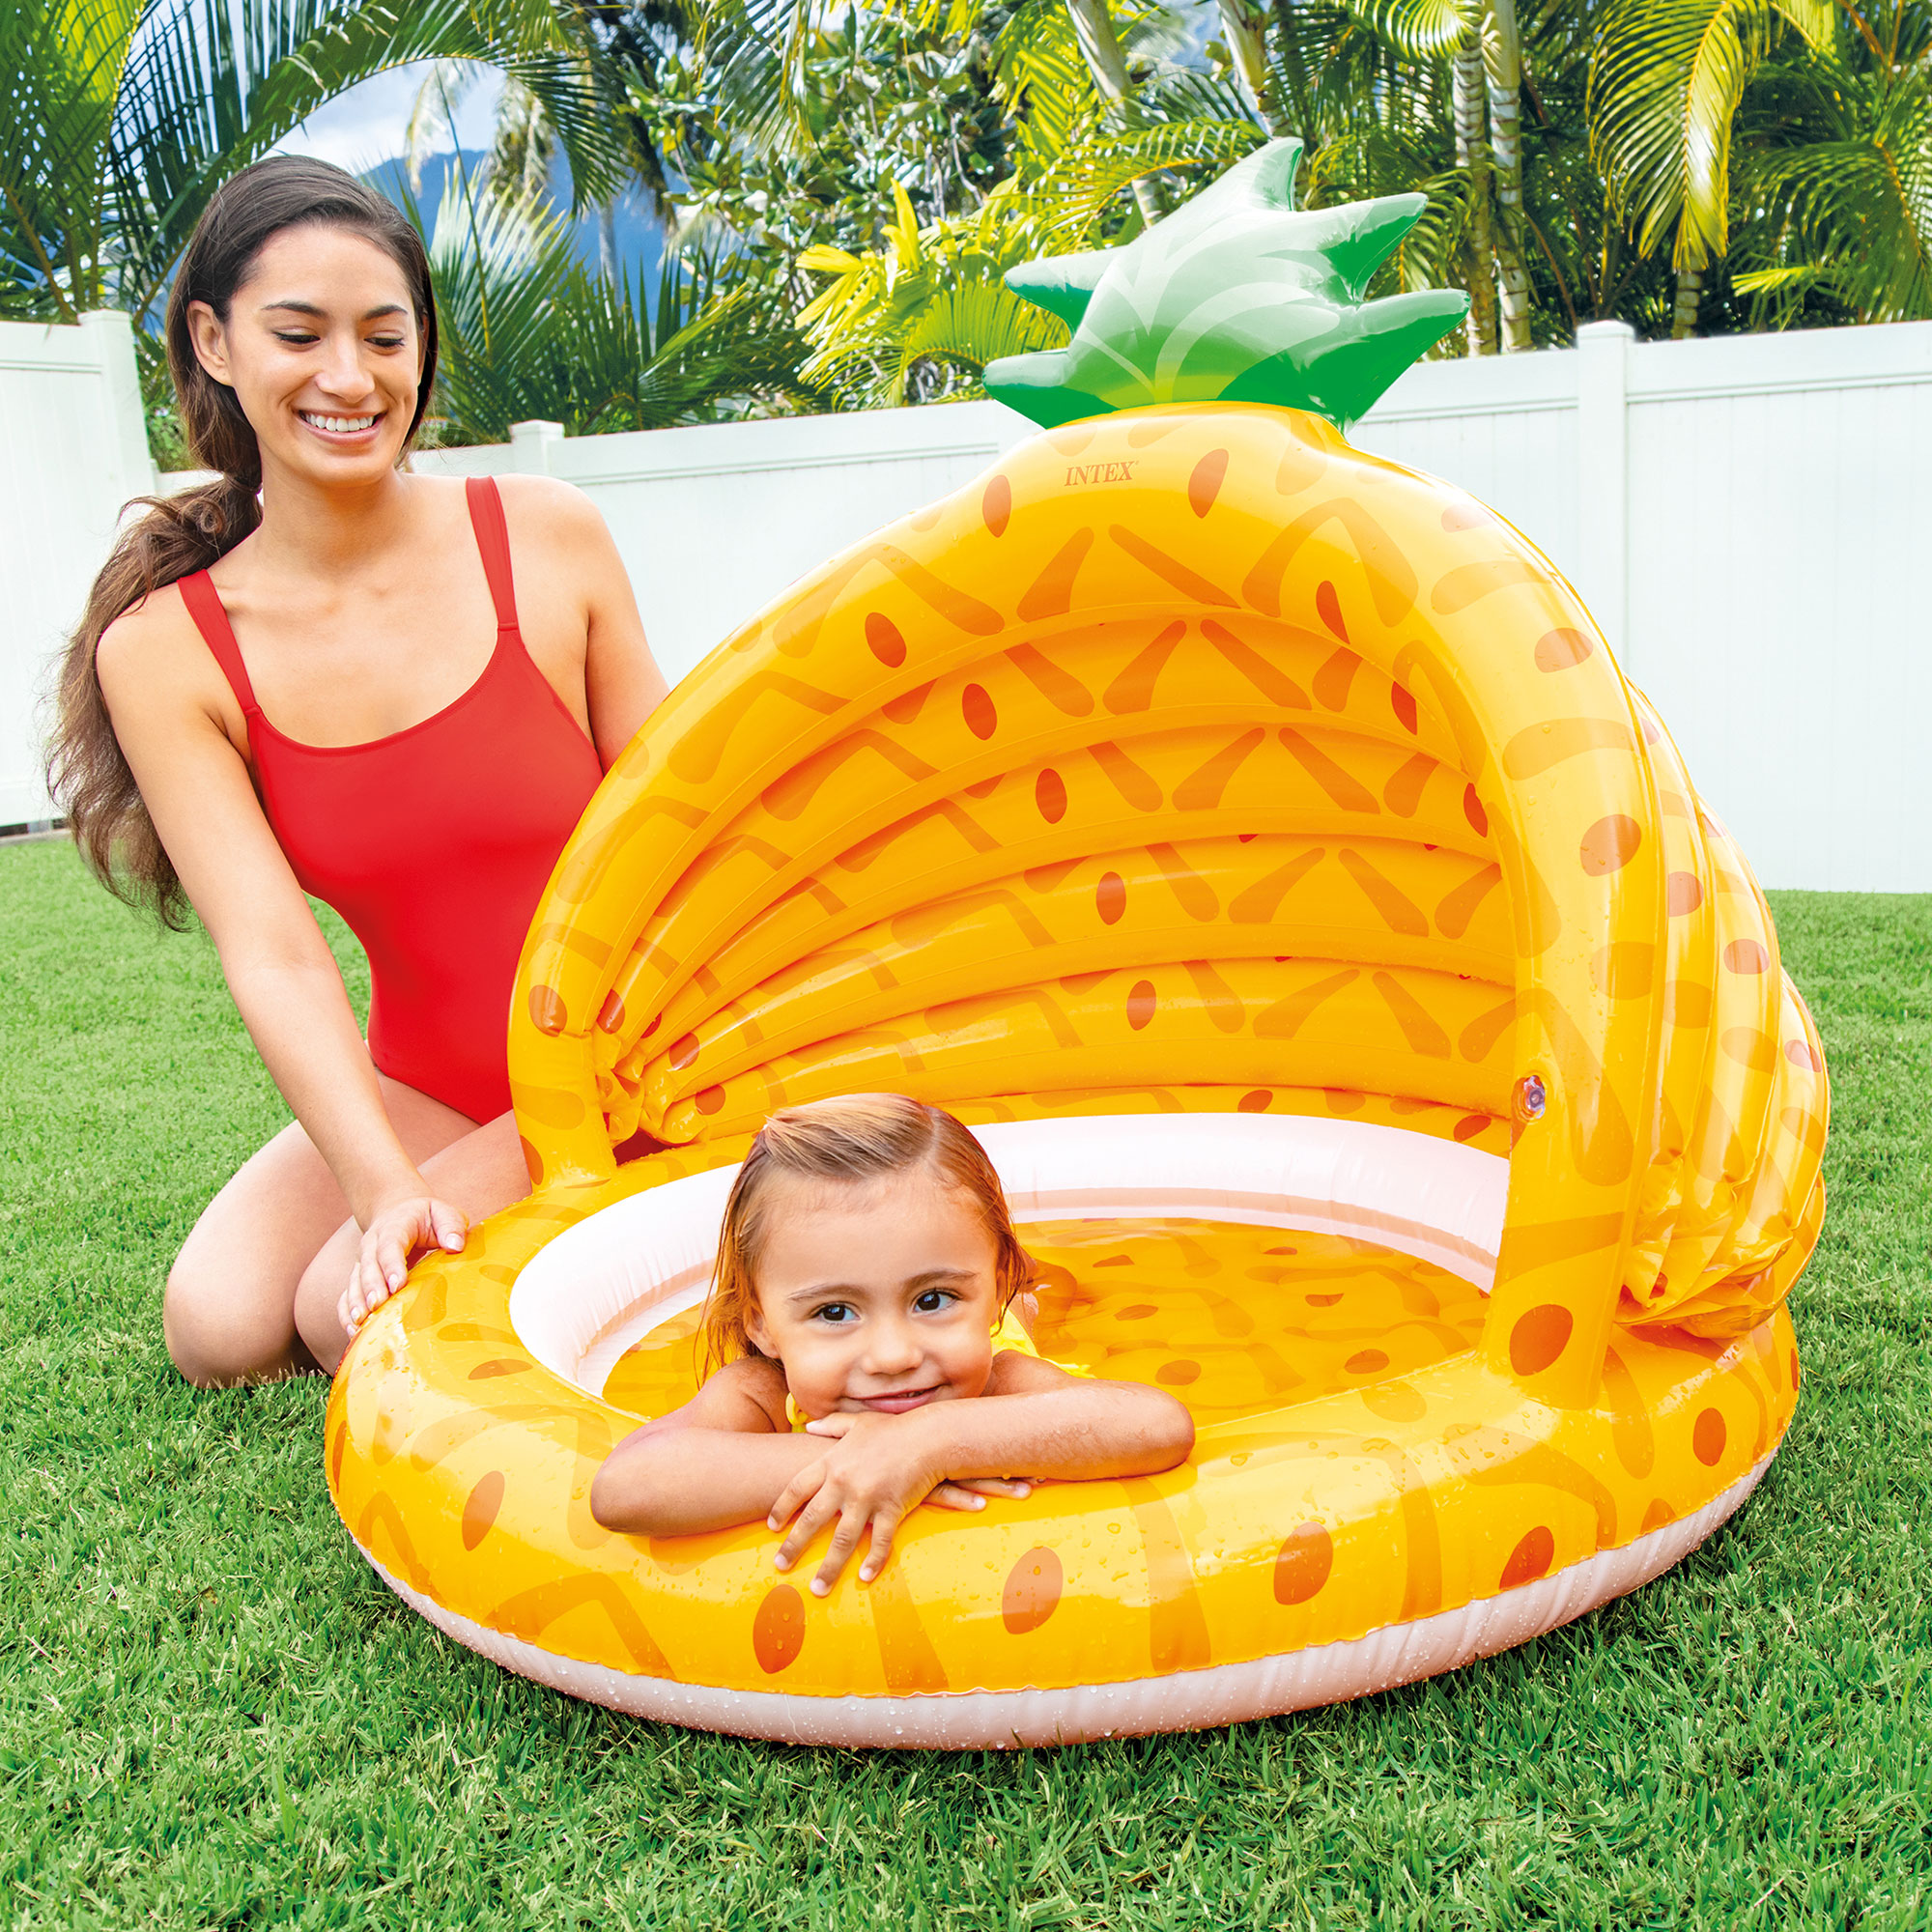 Intex 58414EP 40 Inch Pineapple Outdoor Baby Toddler Inflatable Swimming Pool - image 2 of 3